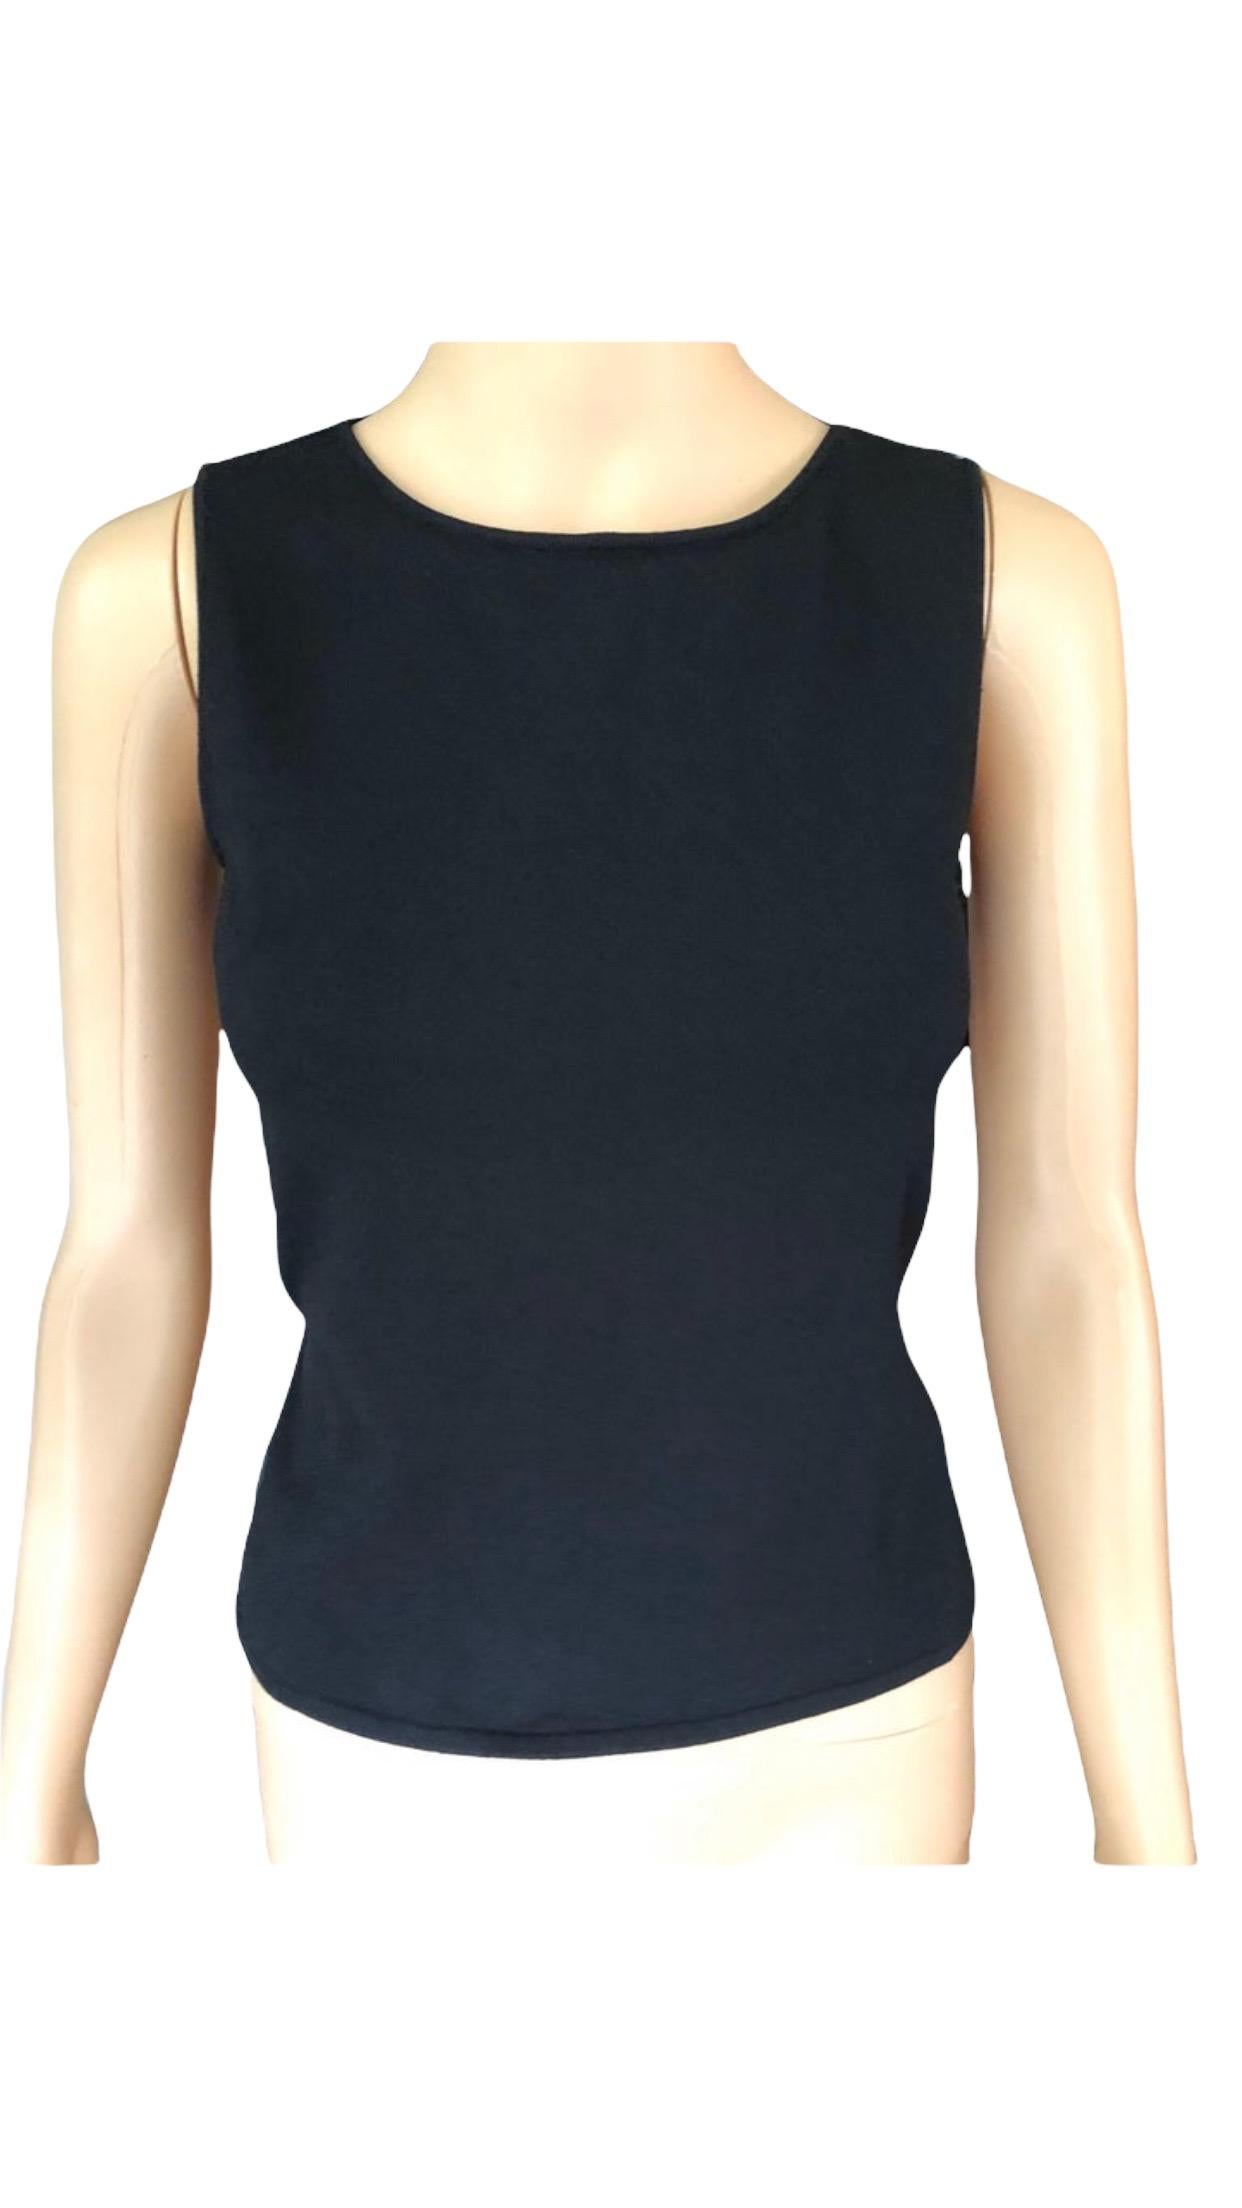 Women's or Men's Gucci by Tom Ford c.1999 Knit Backless Strappy Logo Buckle Black Crop Top For Sale